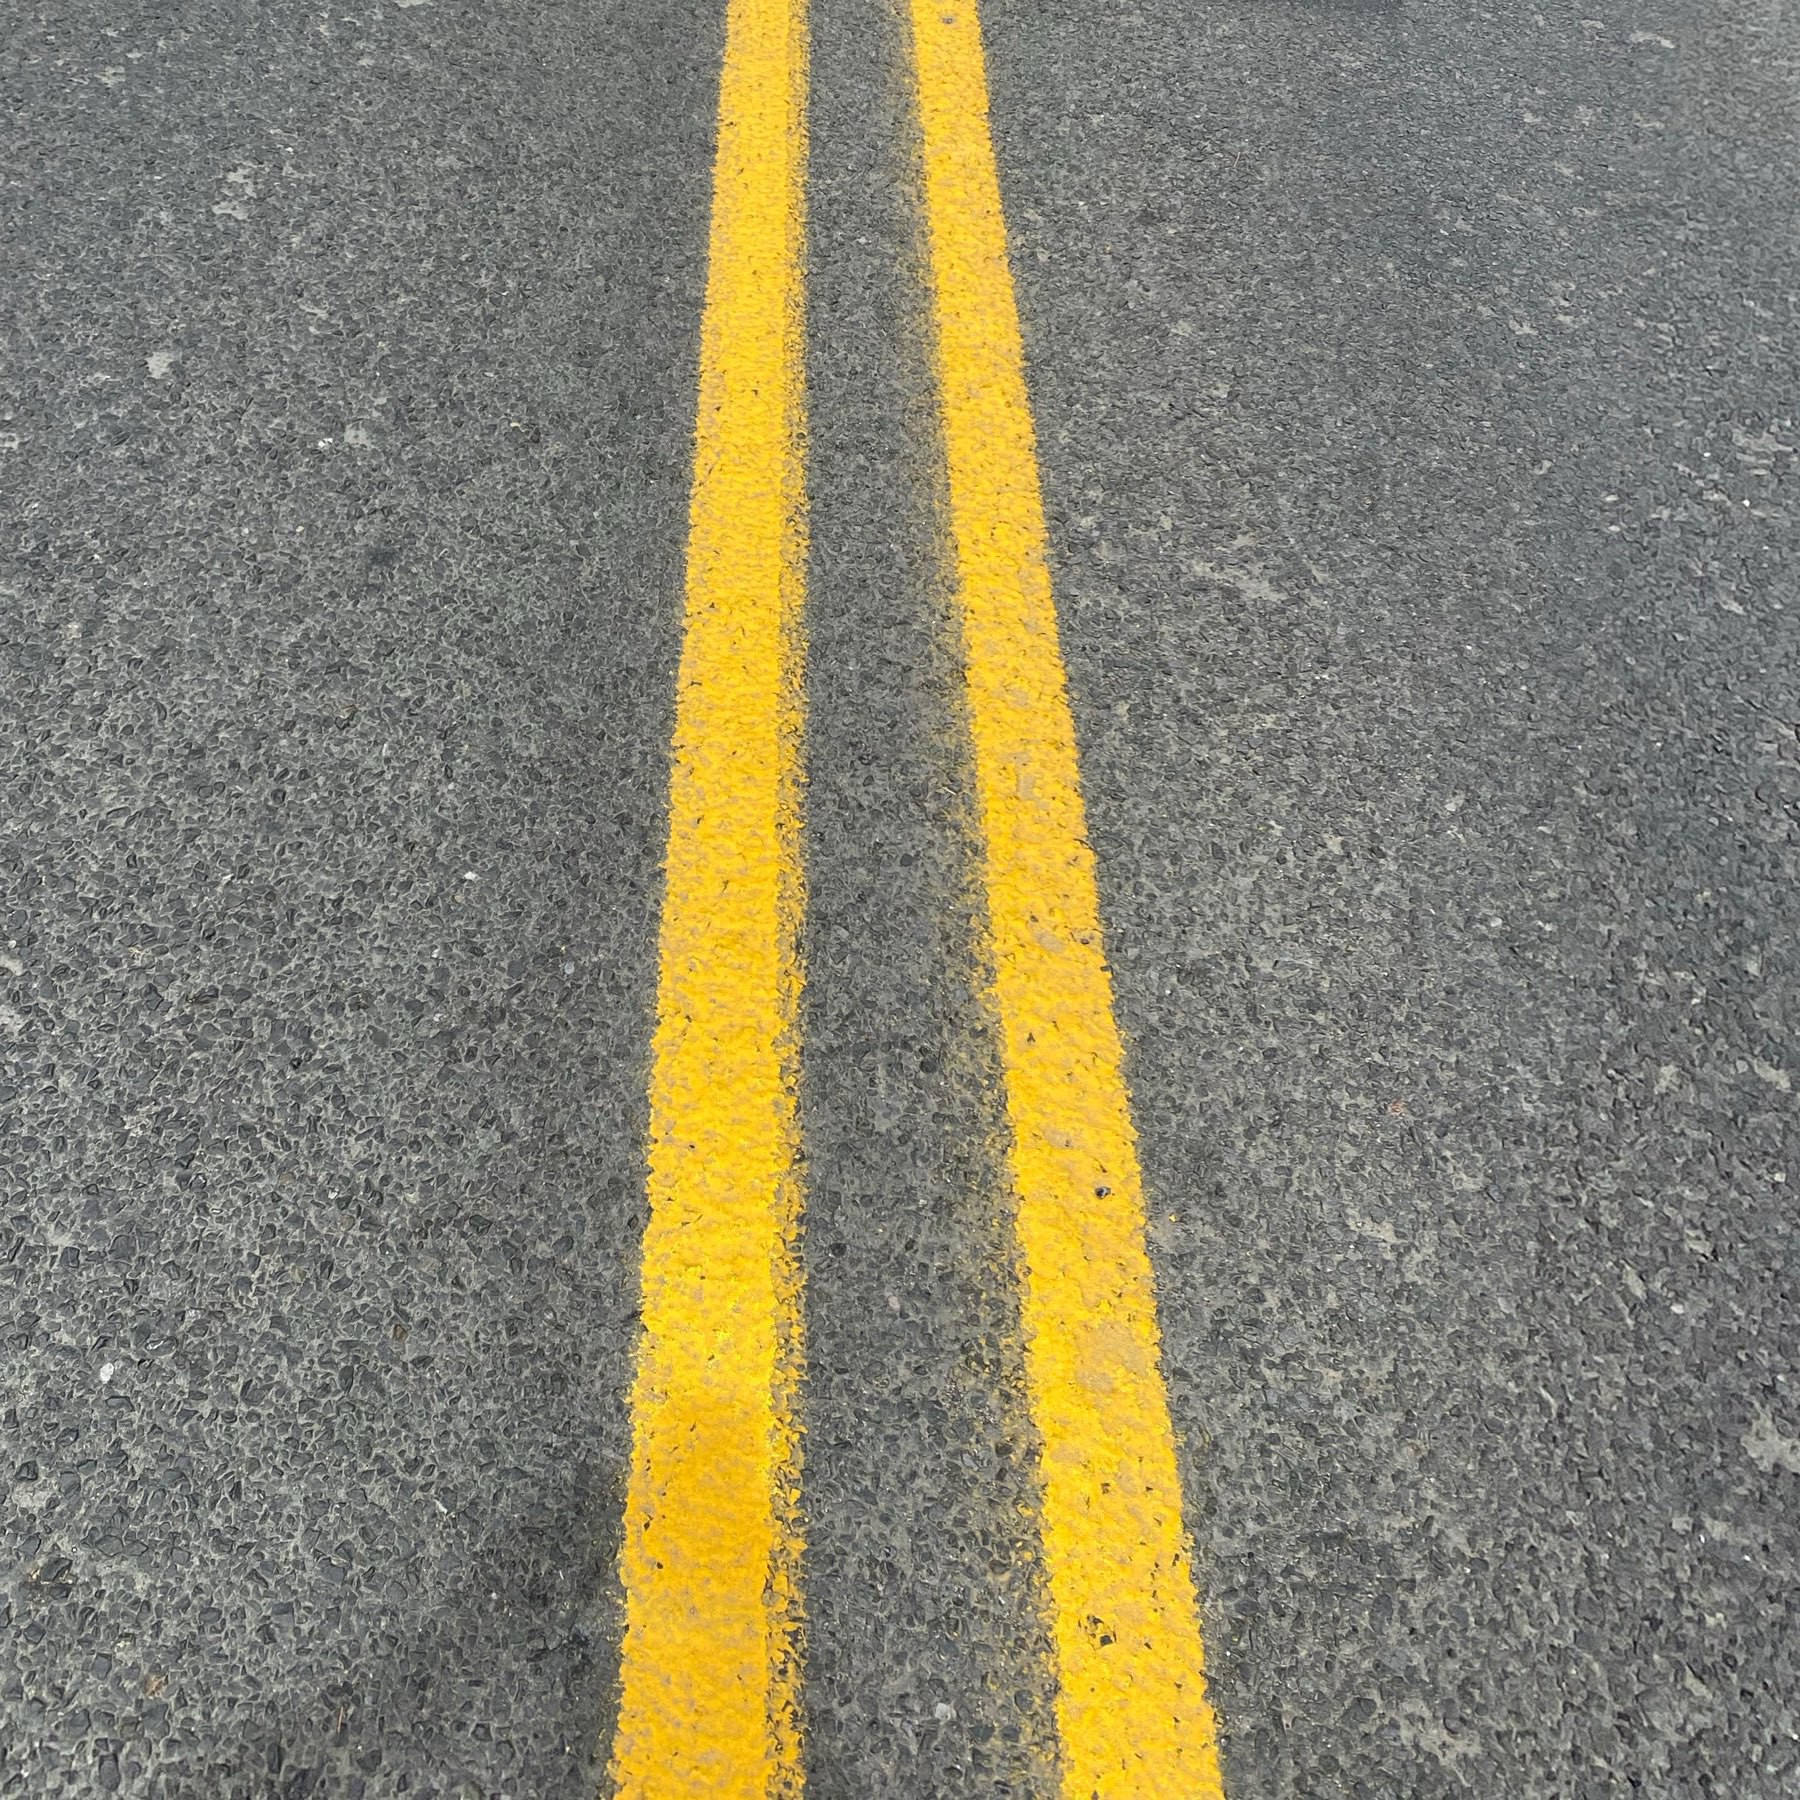 Two Lines In The Road